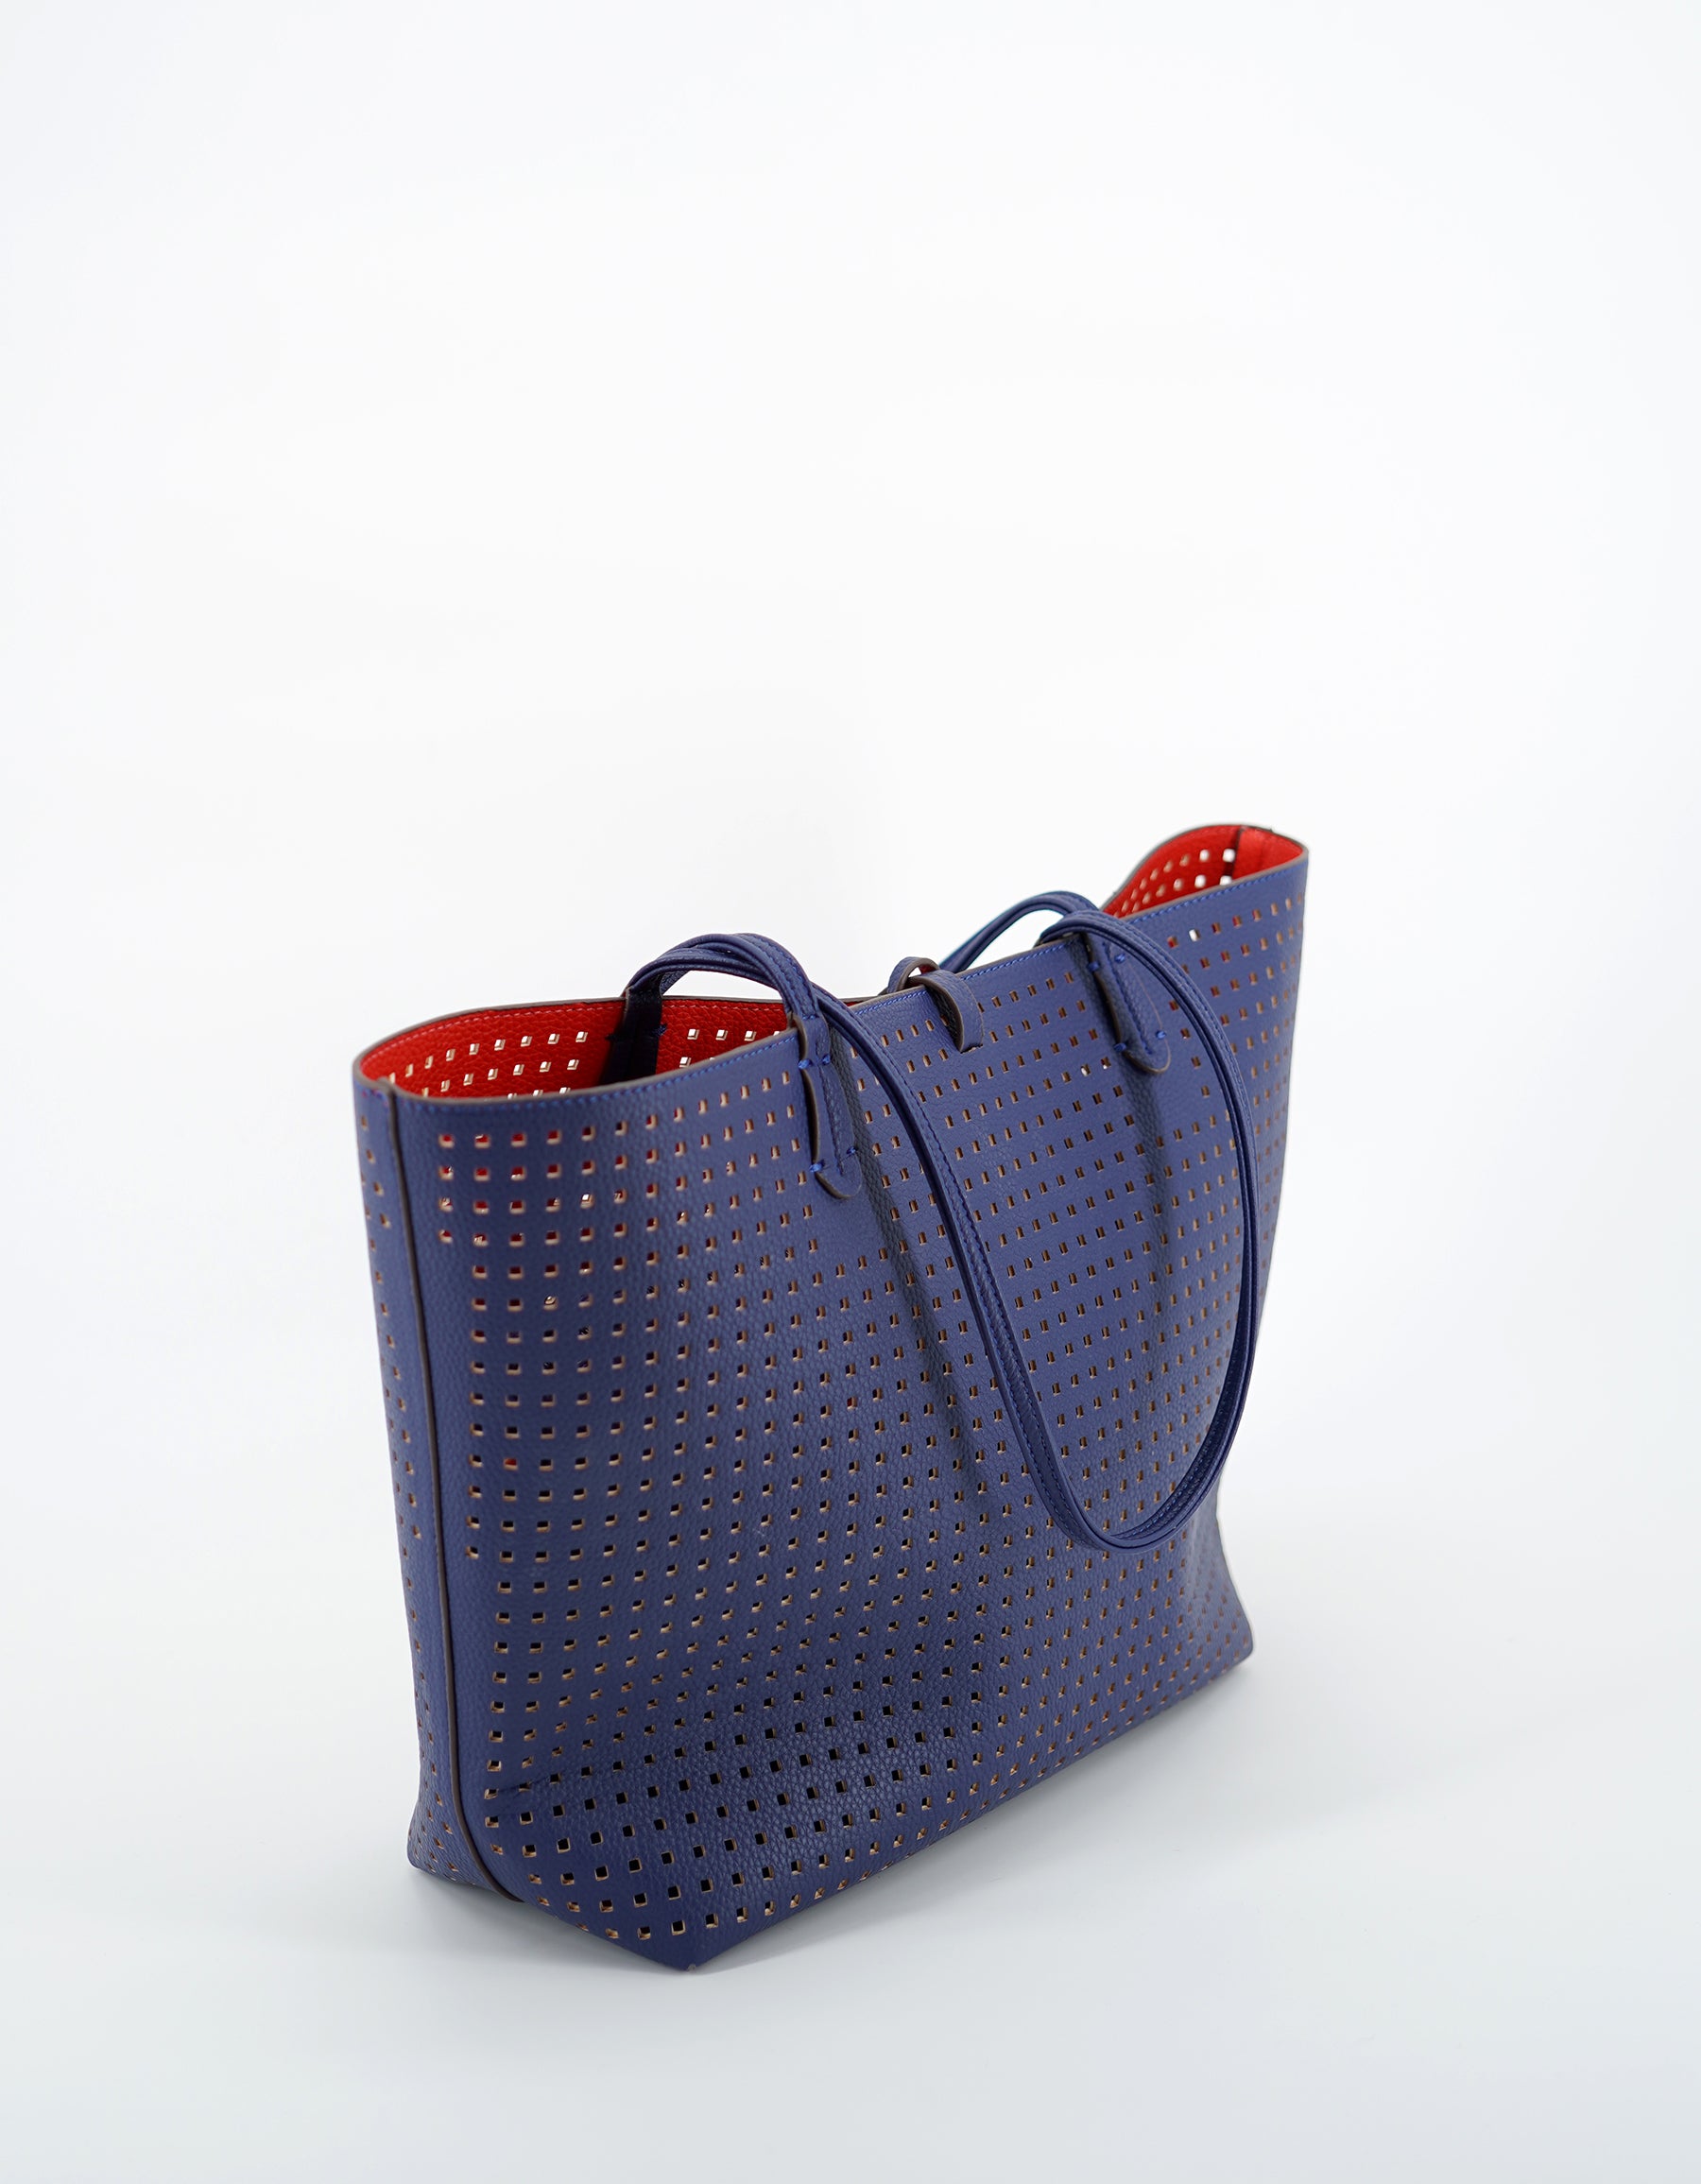 DEPARTURE TOTE PERFORATED SQUARE ROYAL BLUE/CORAL